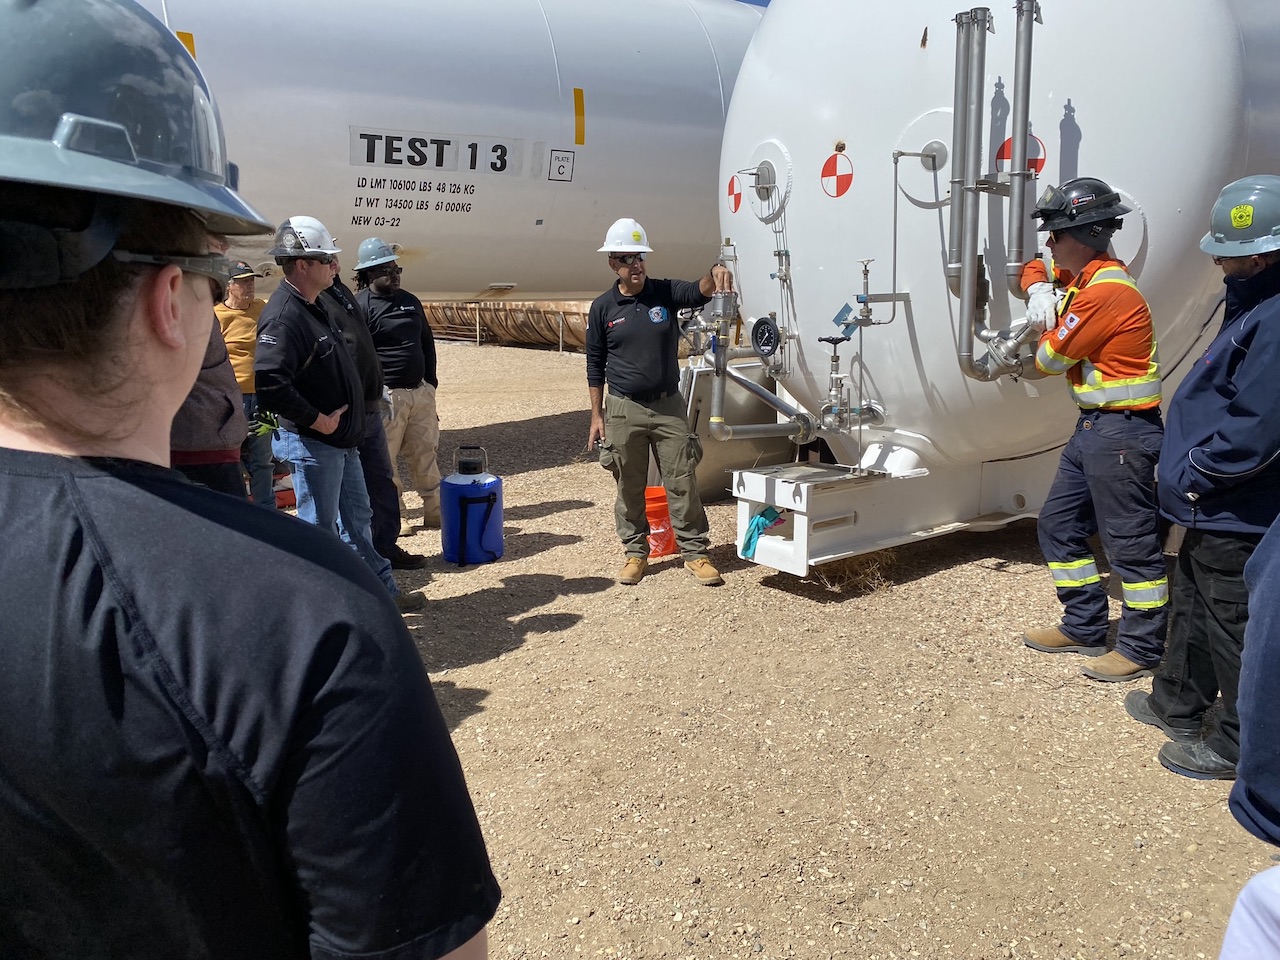 Figure 1. Training course in progress at the ARTC located at the TTC. (TTC Operated by ENSCO)